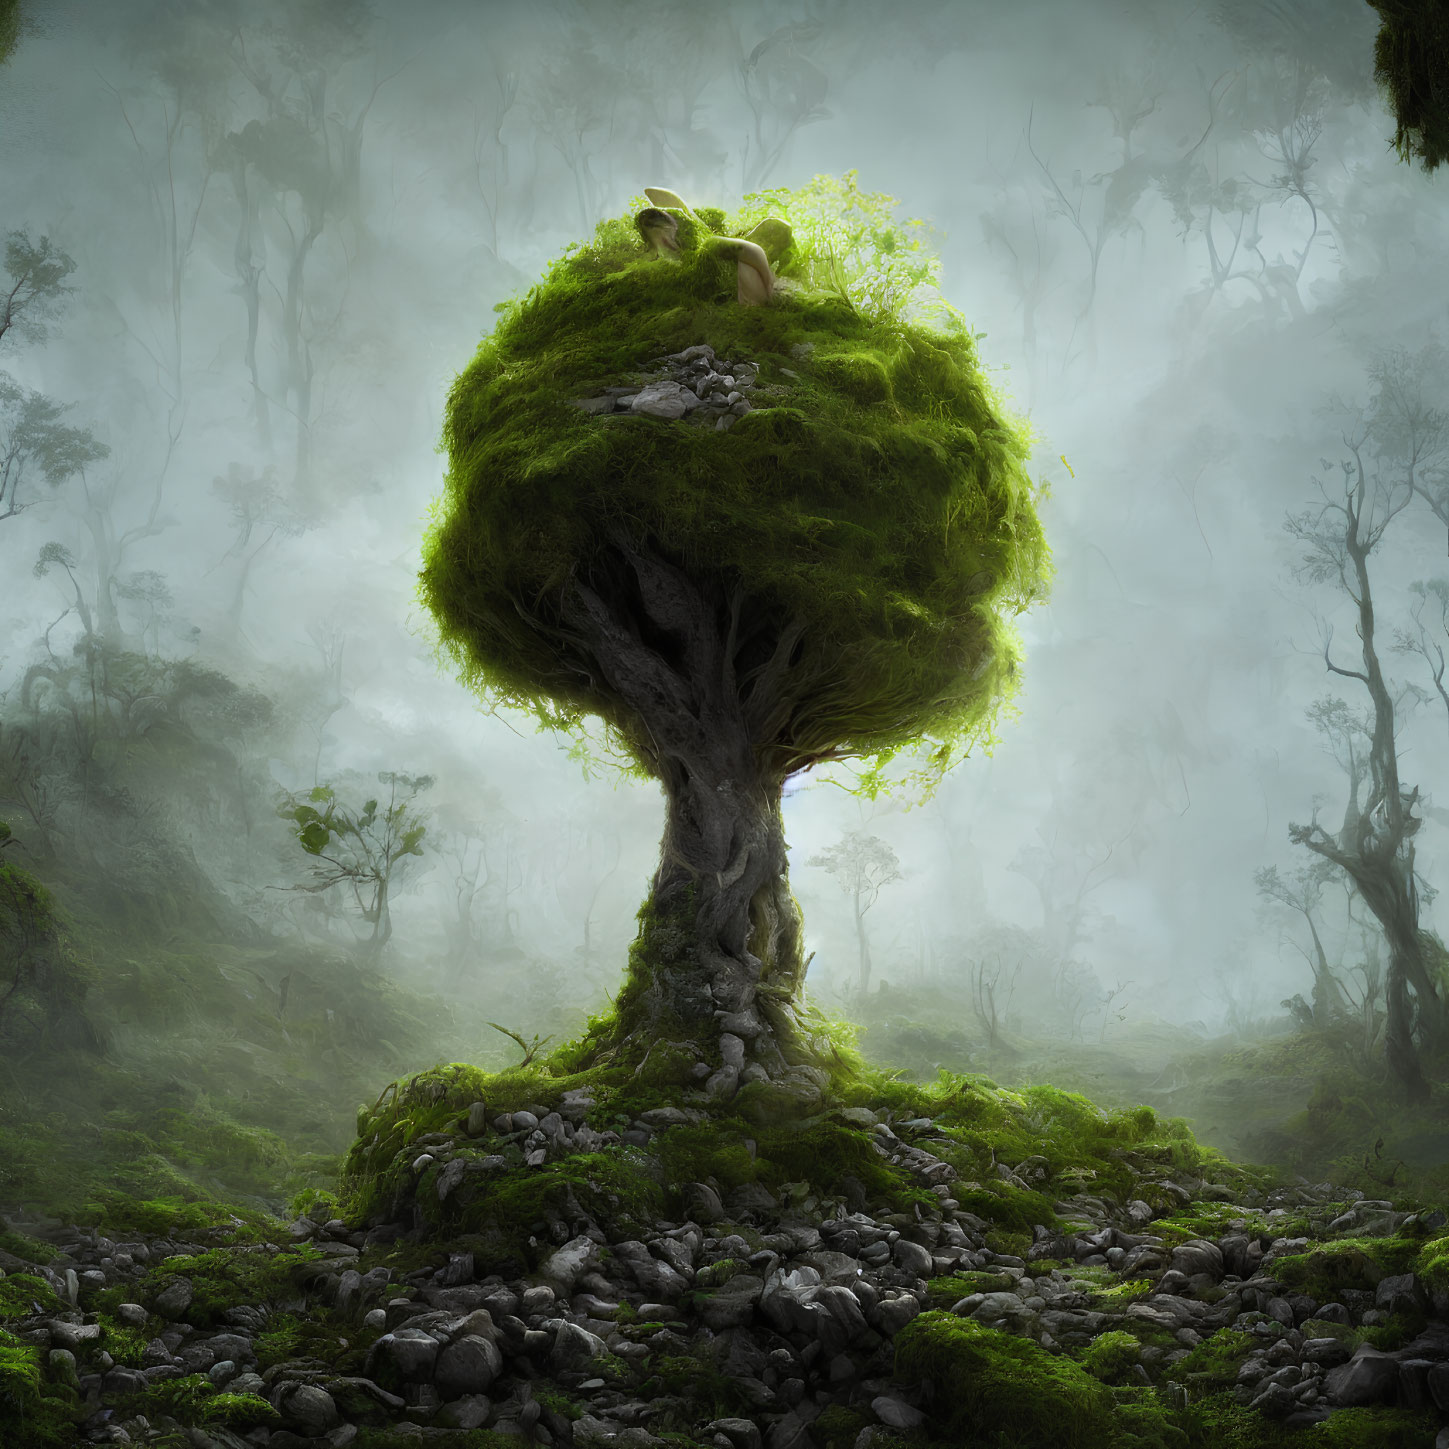 Mystical tree with moss-covered canopy in foggy forest